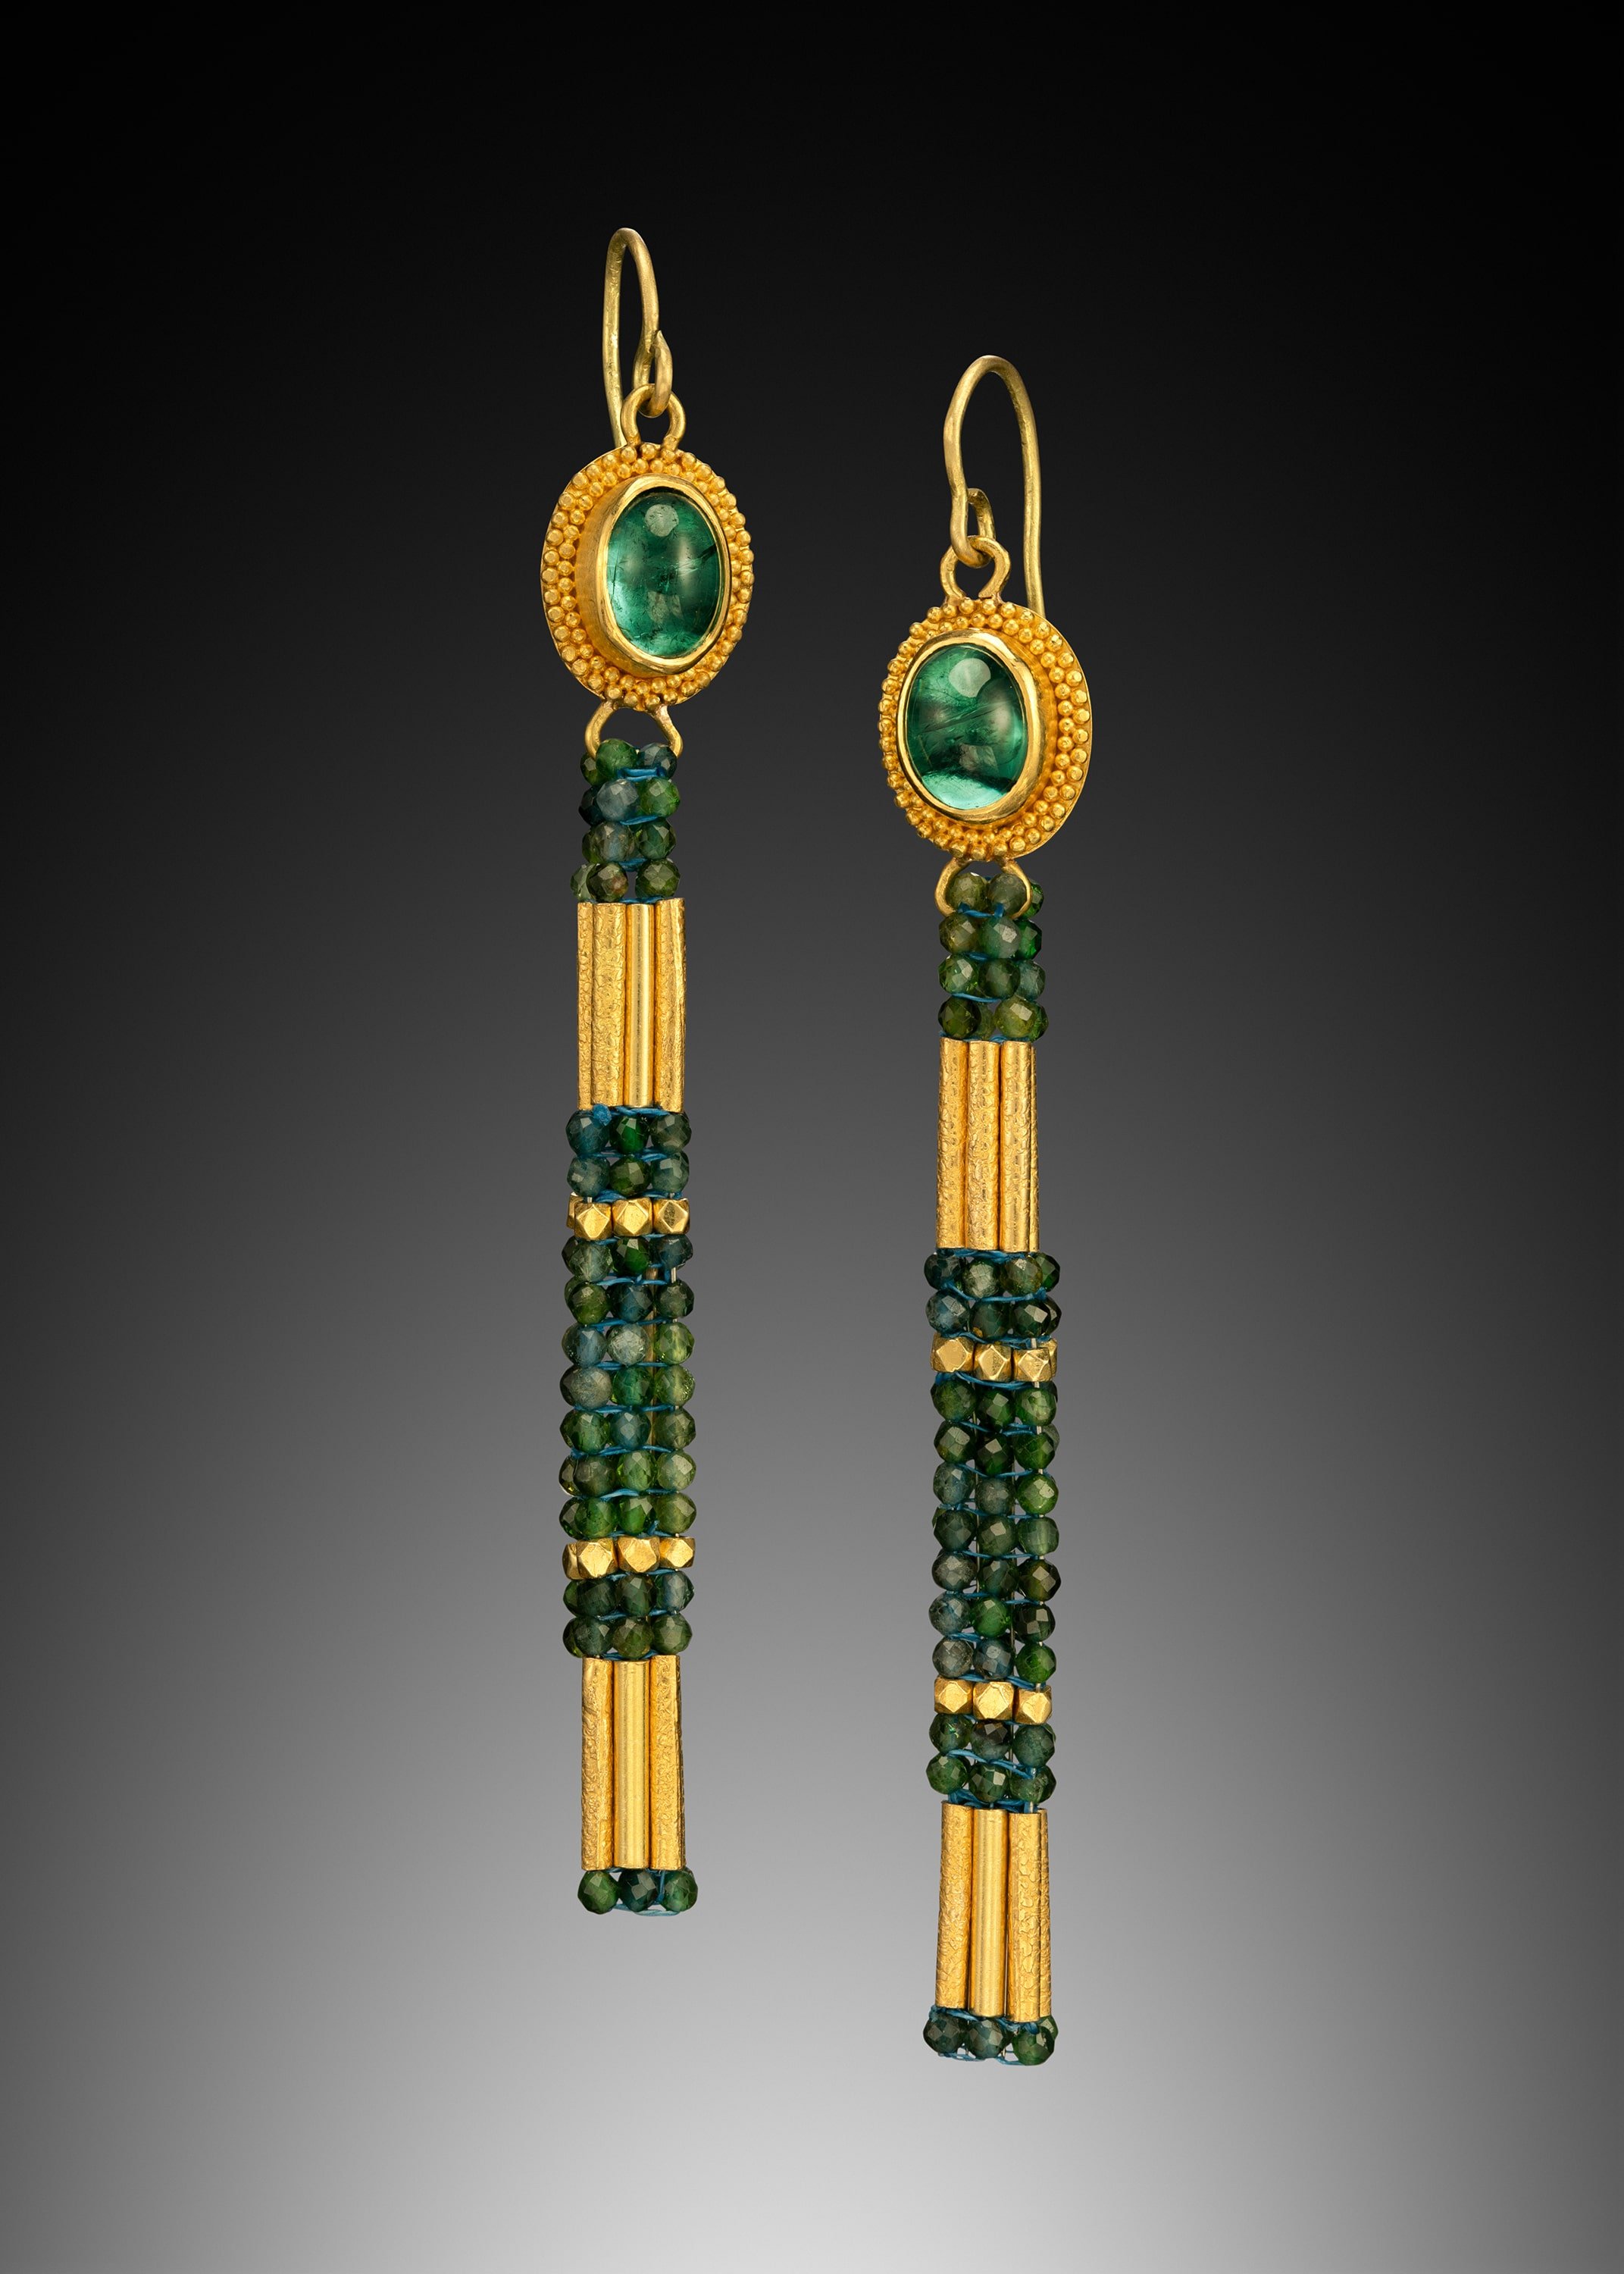 Tourmaline Dangle Earrings. Hand fabricated, fused, and granulated blue-green tourmaline bezels, woven dangle of tourmaline and 18k gold beads.